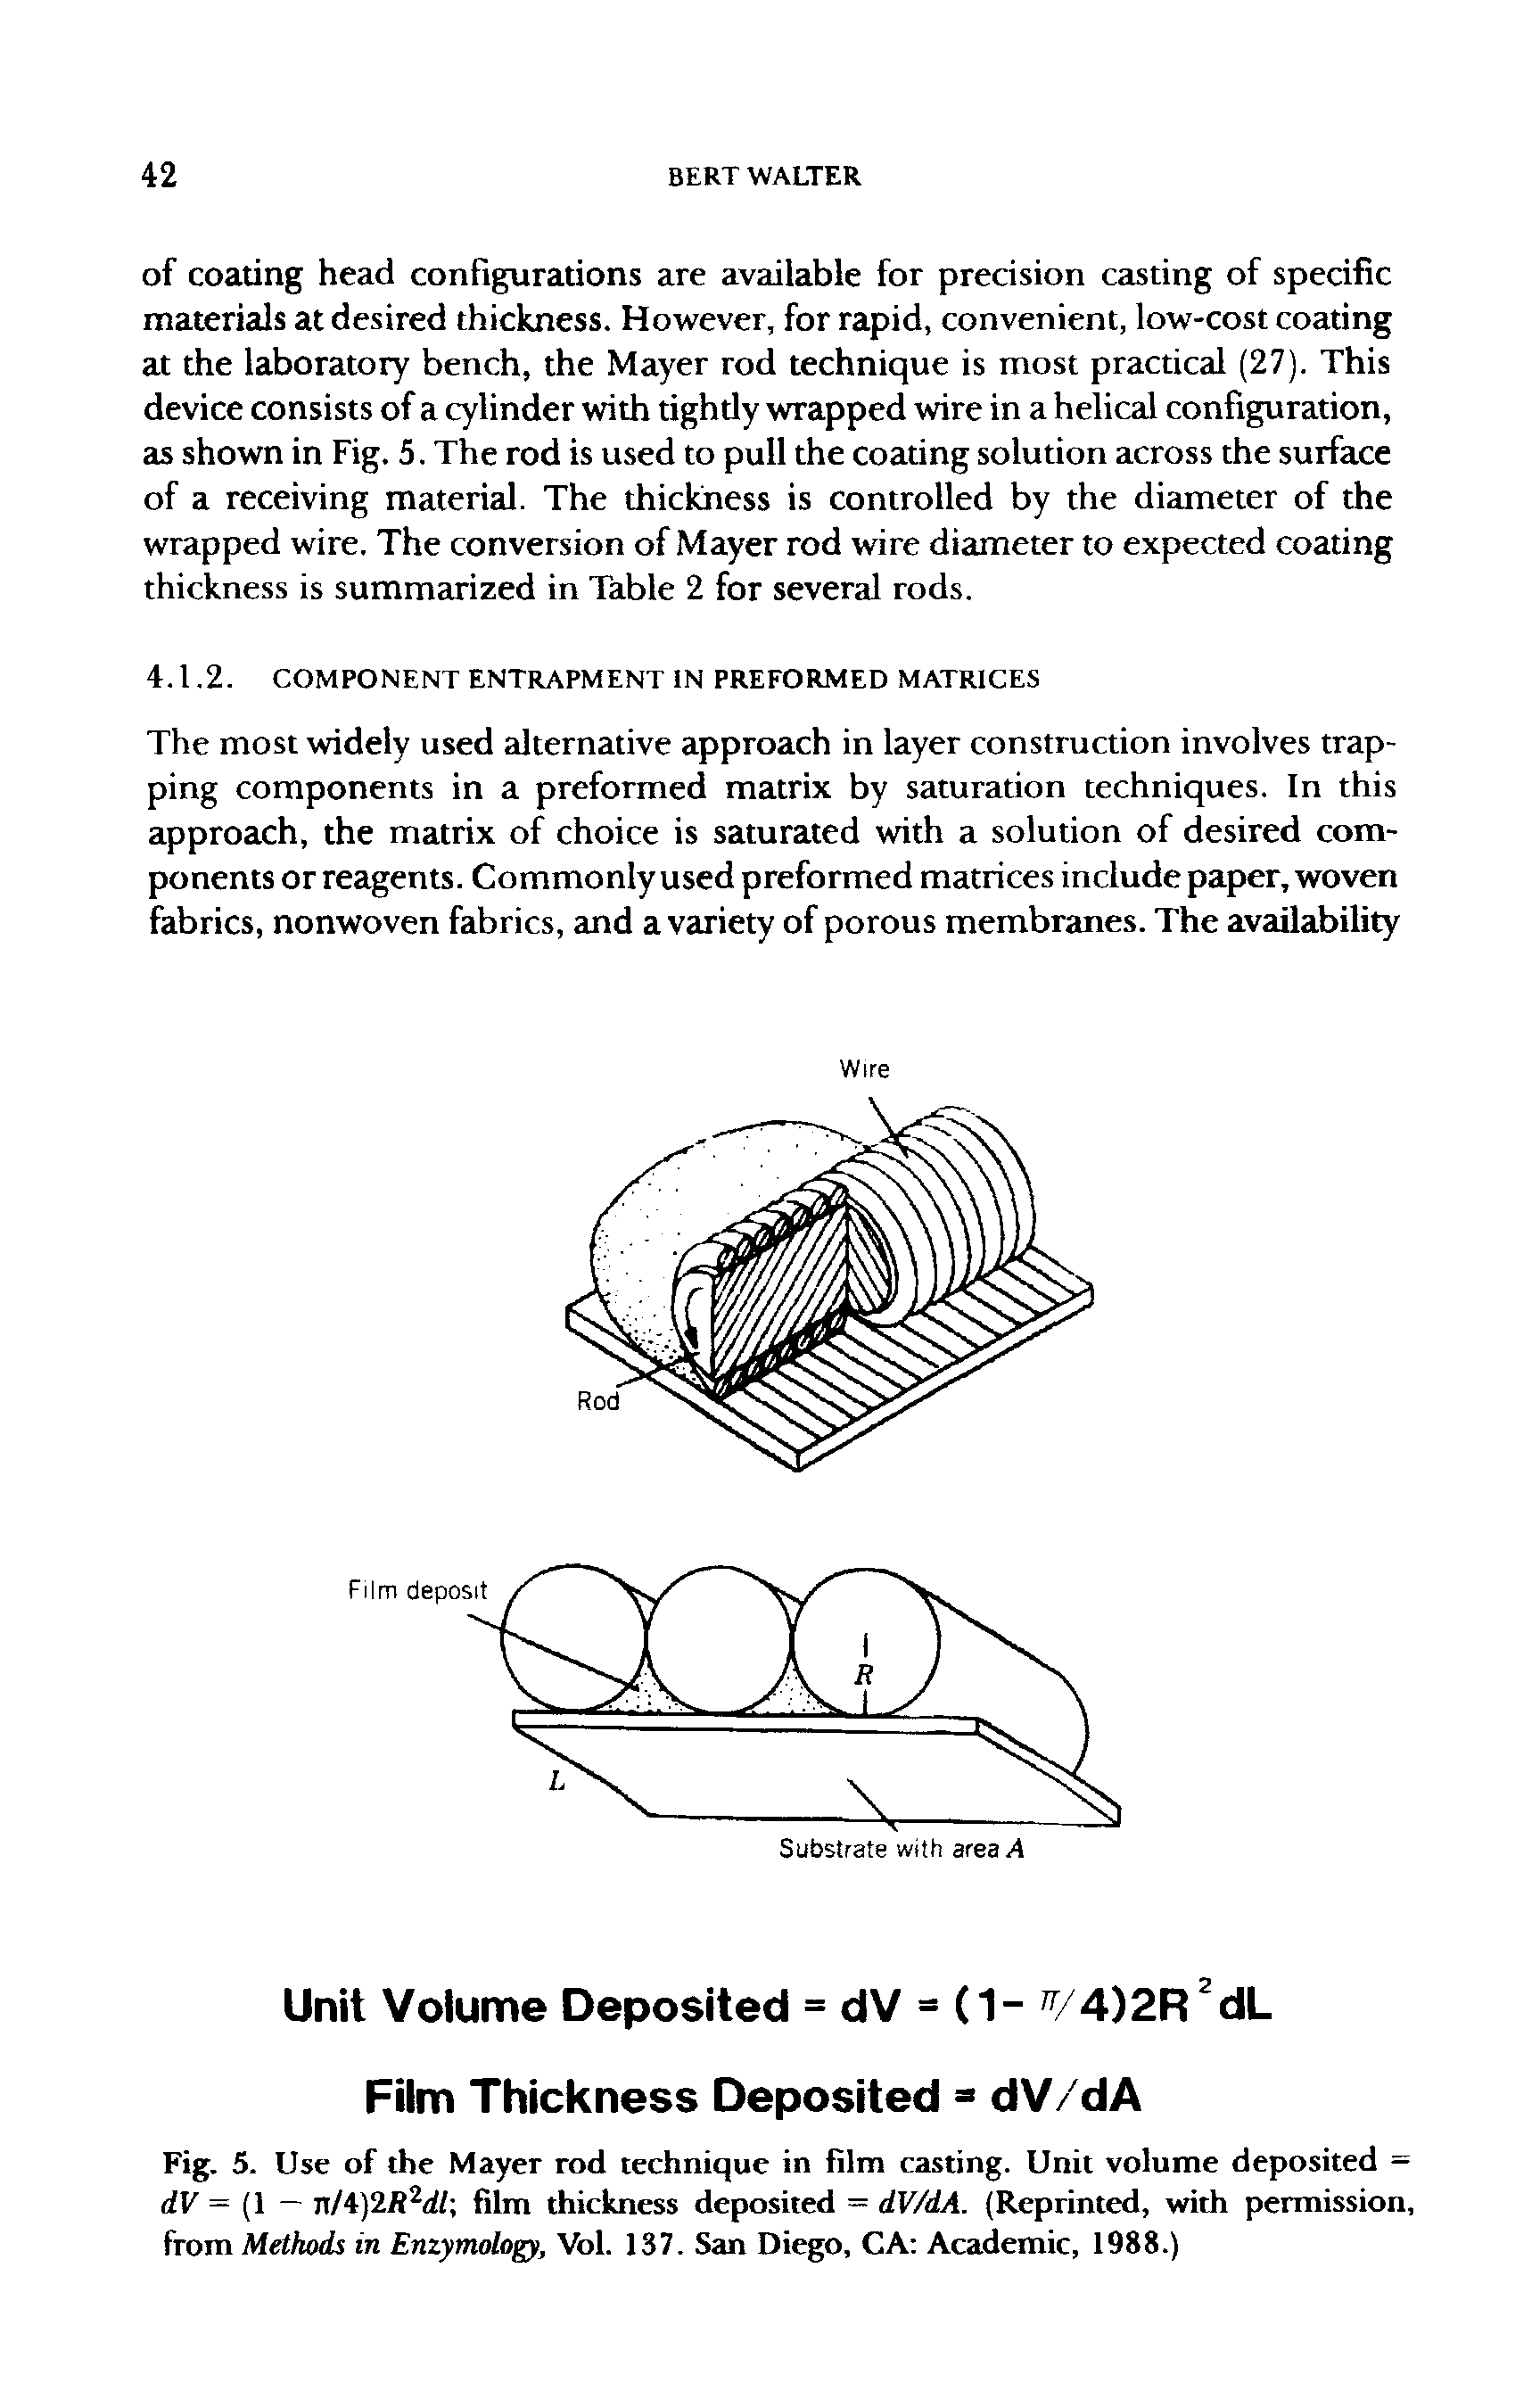 Fig. 5. Use of the Mayer rod technique in film casting. Unit volume deposited = dV = — n/4)2fi d/ film thickness deposited = dV/dA. (Reprinted, with permission, from Methods in Enzymology, Vol. 137. San Diego, CA Academic, 1988.)...